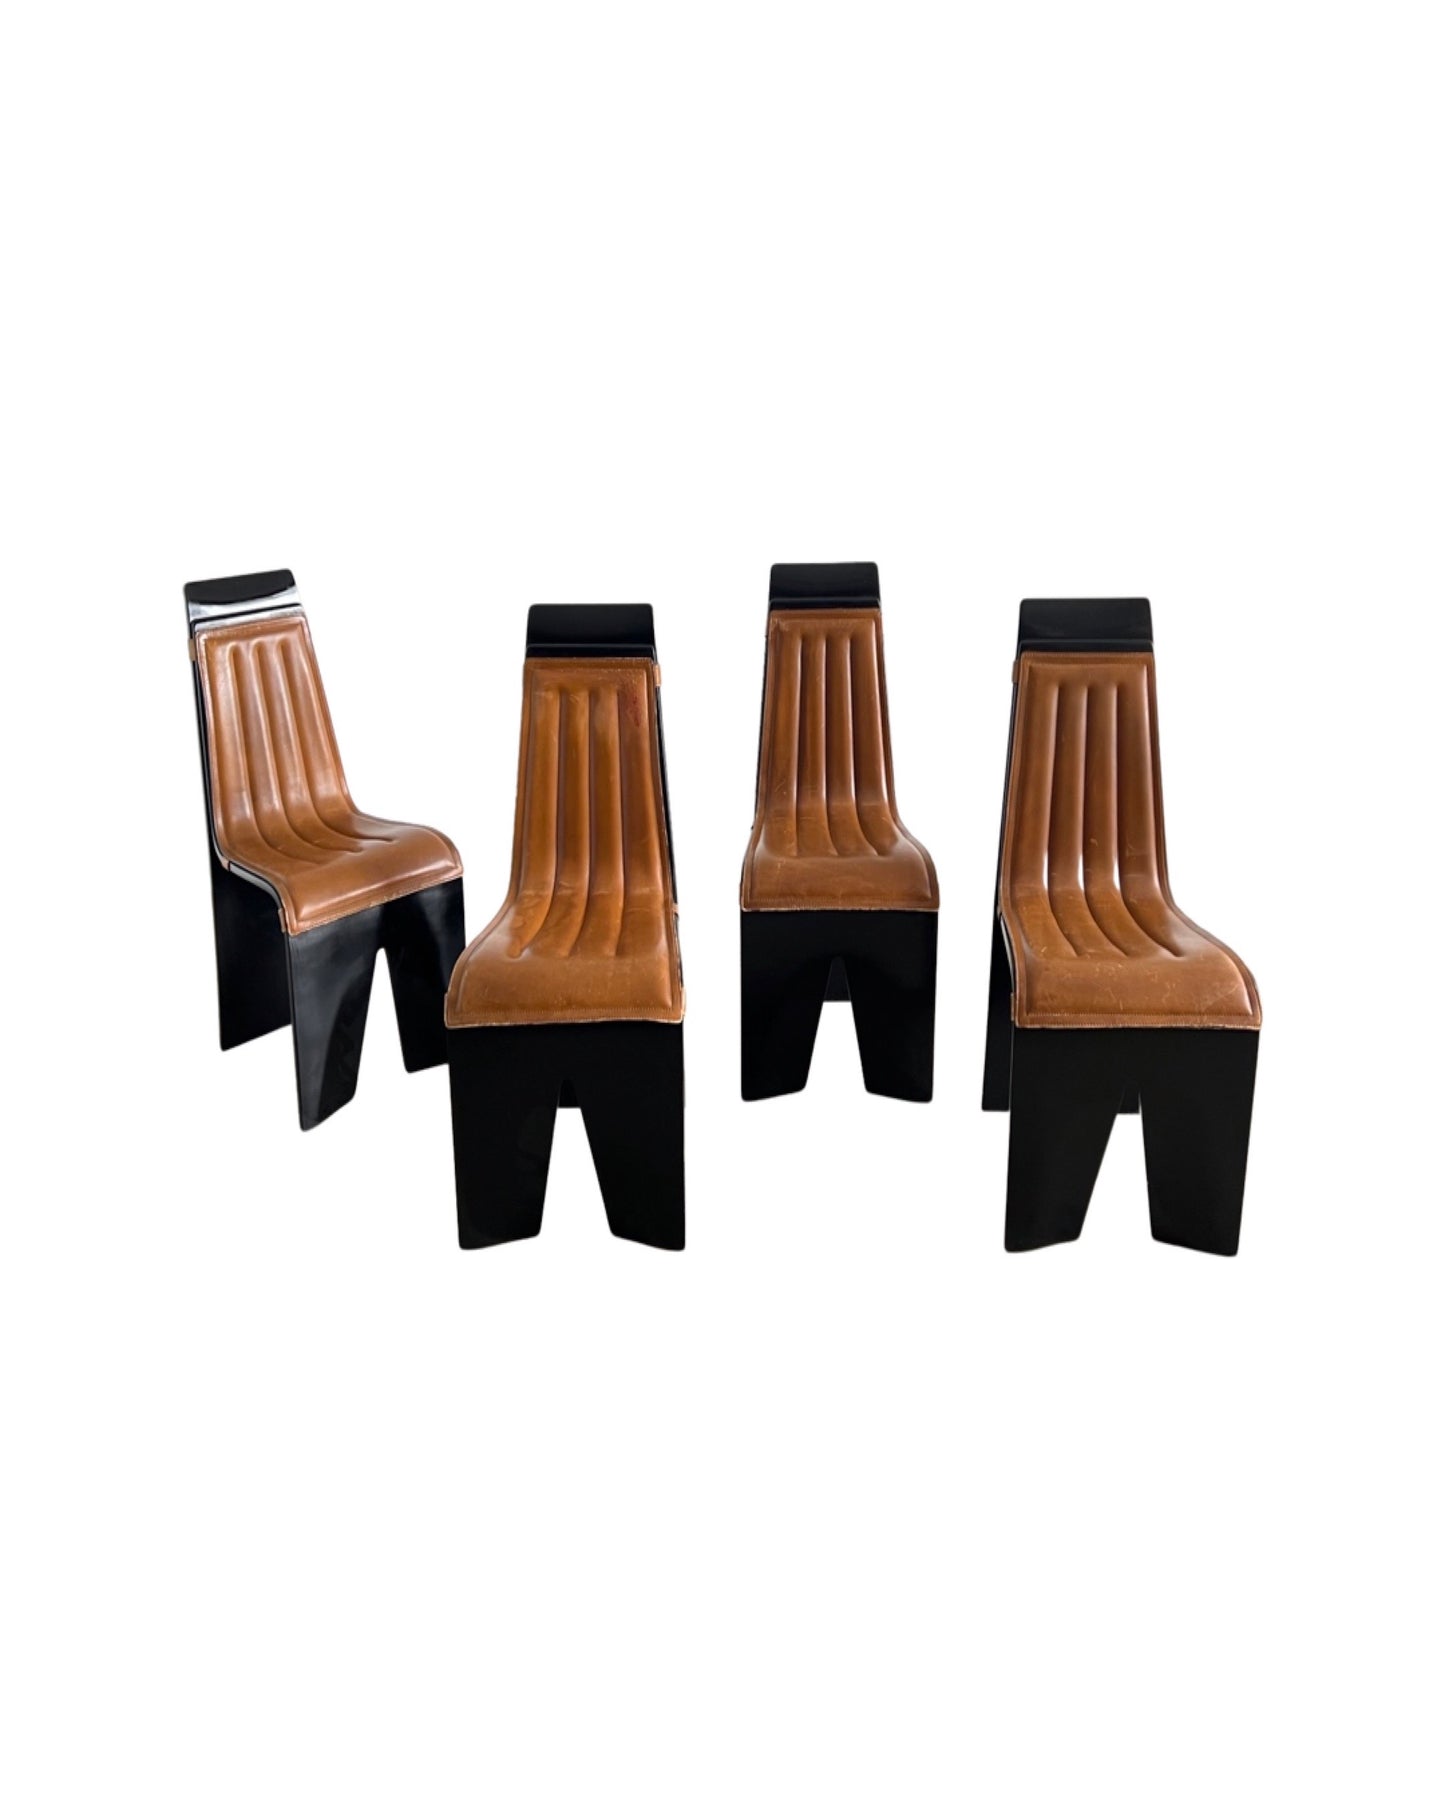 Willy Rizzo Dining Chairs for Mario Sabot, 1960s